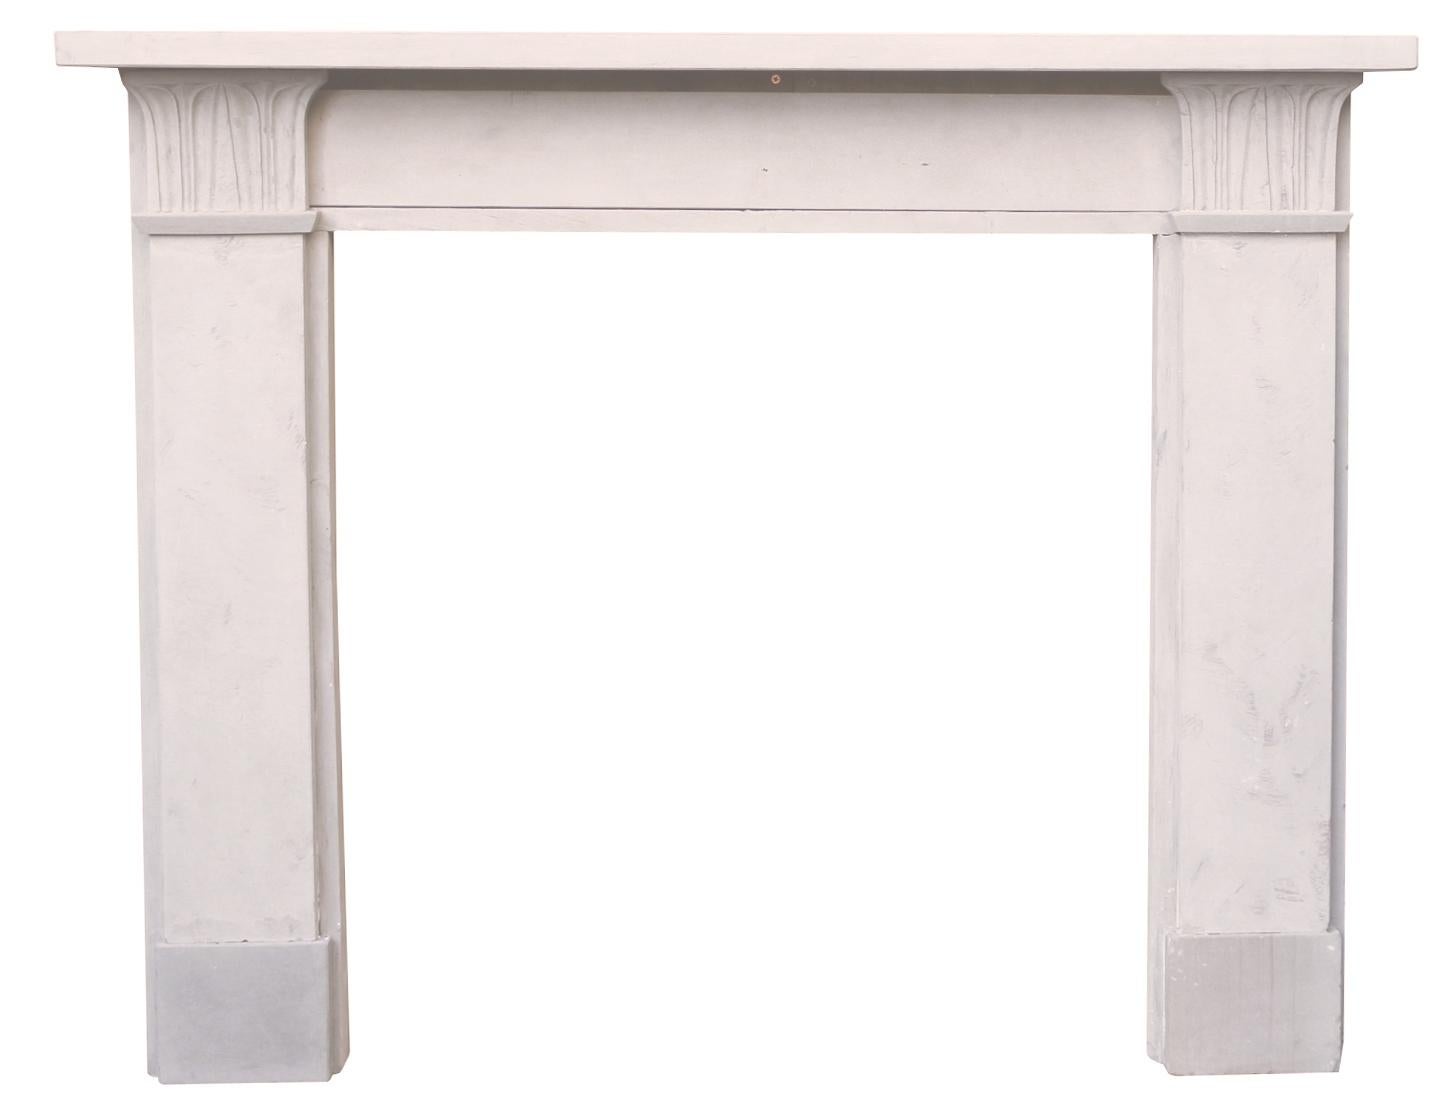 Reclaimed Pale Stone Fire Mantel In Good Condition For Sale In Wormelow, Herefordshire